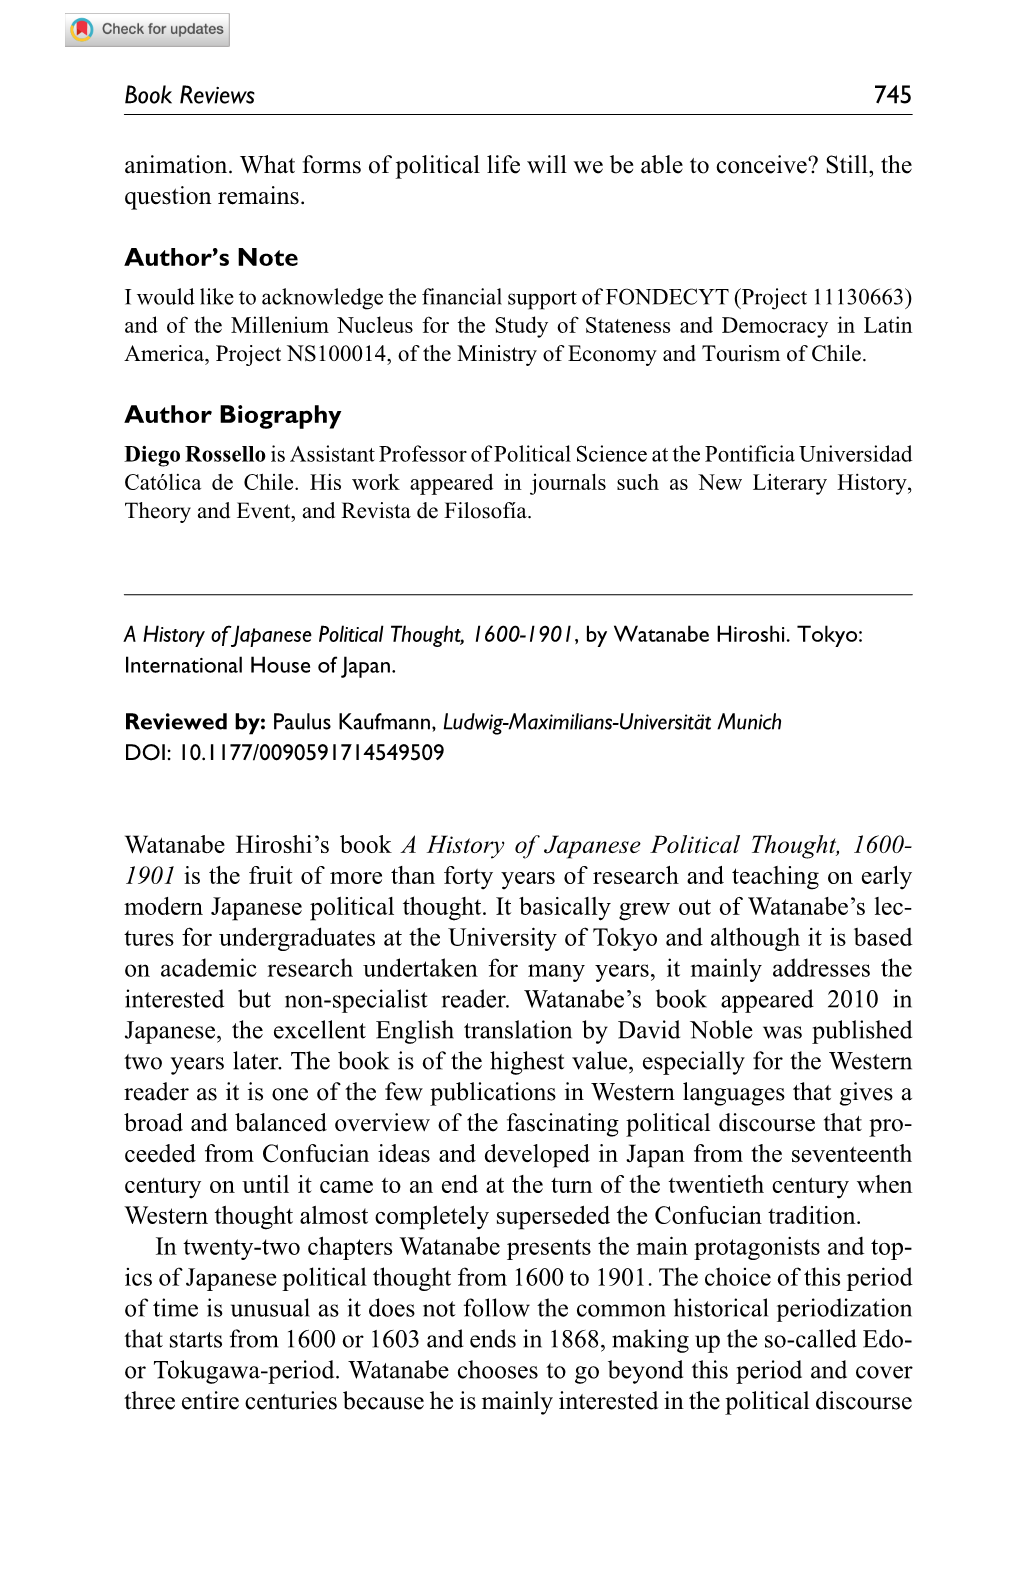 Book Review: a History of Japanese Political Thought, 1600-1901, by Watanabe Hiroshi